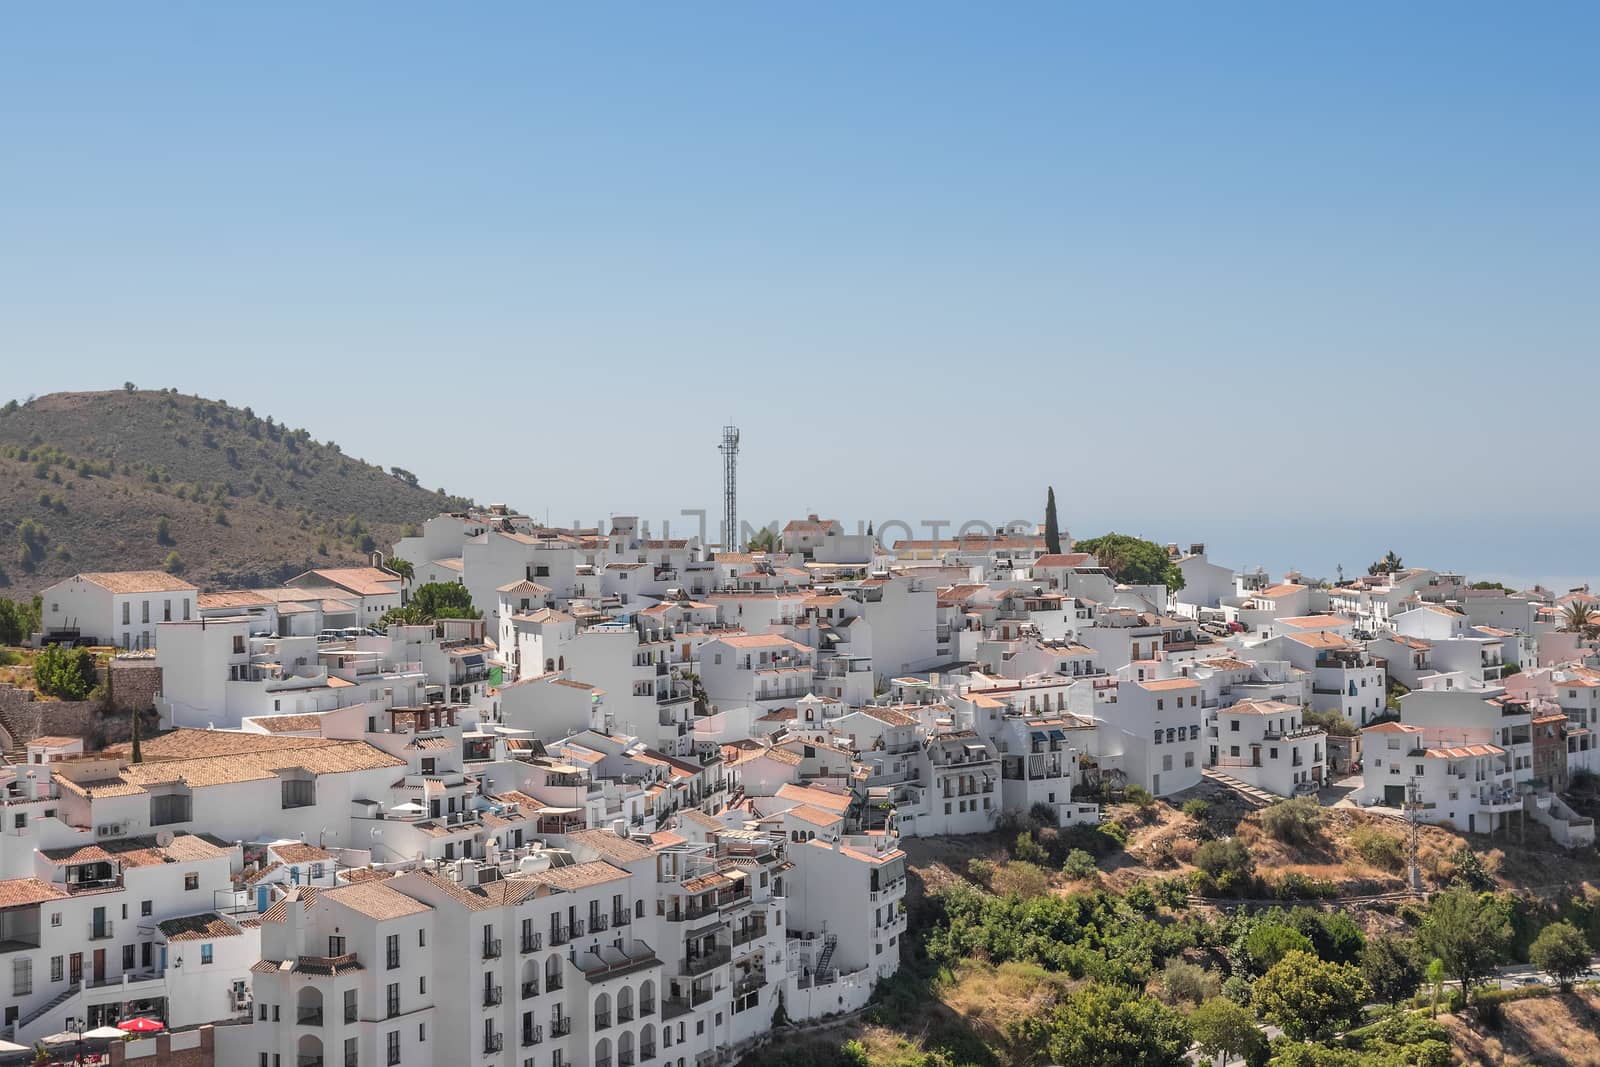 View over the town of Frigiliana, Spain by anikasalsera